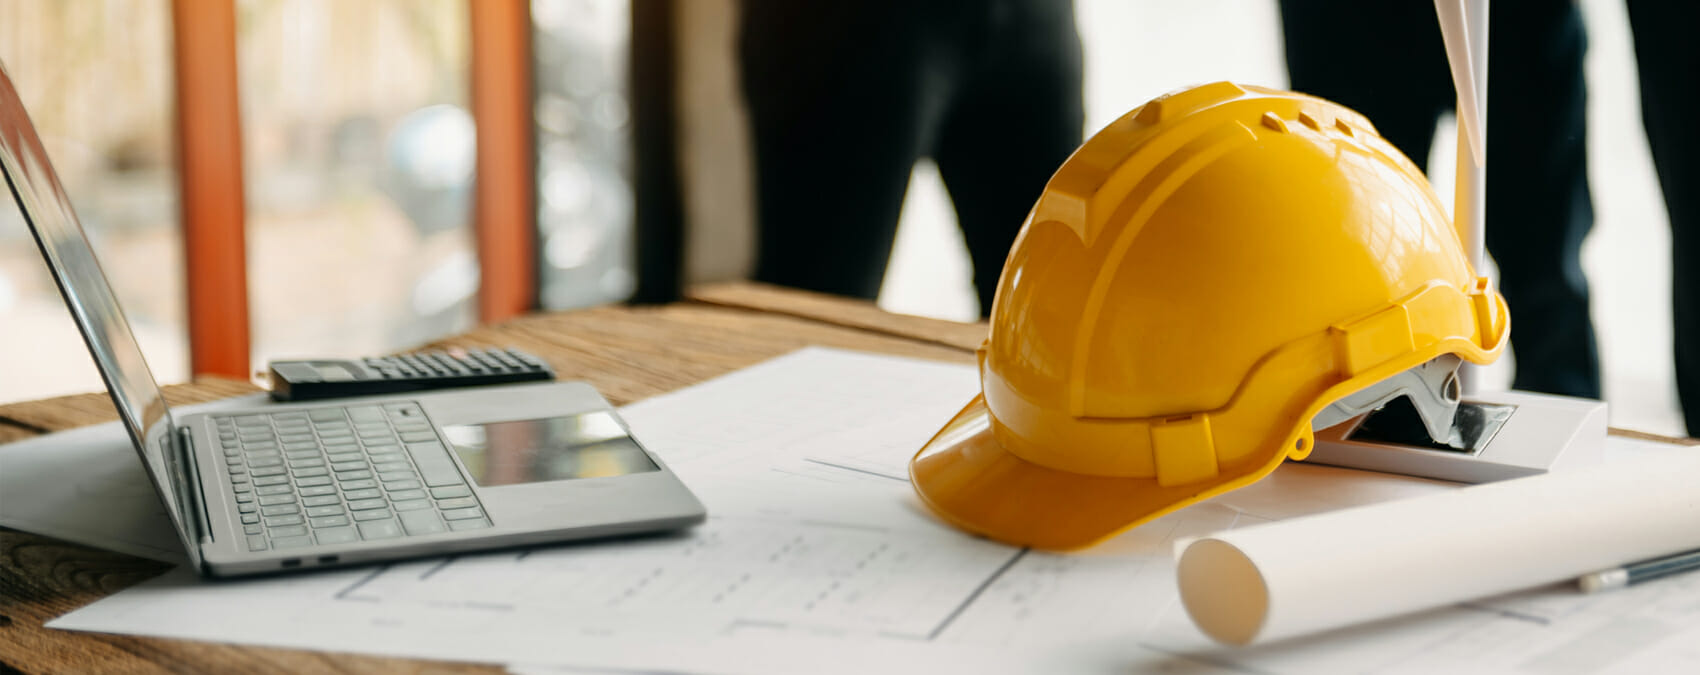 A hard hat sits on a desk next to a laptop and blueprints